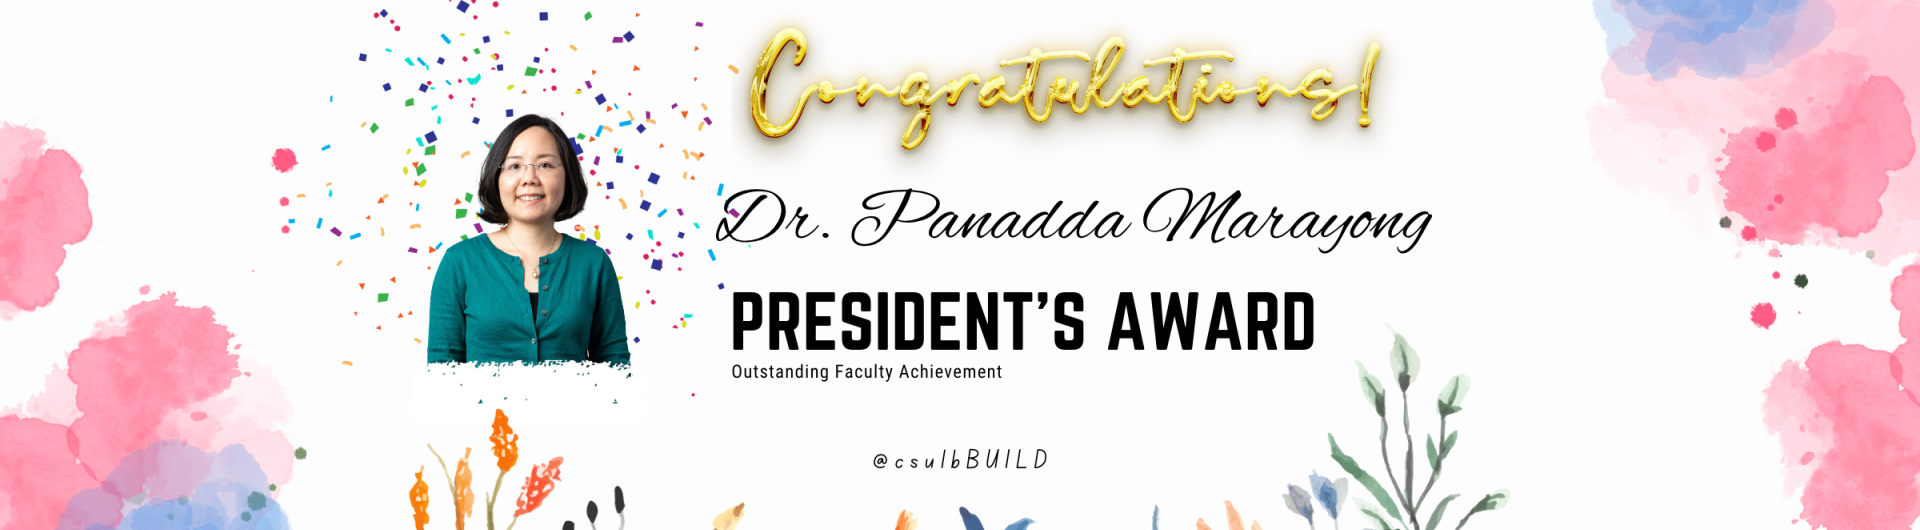 Outstanding Faculty Achievement - Dr. Panadda Marayong